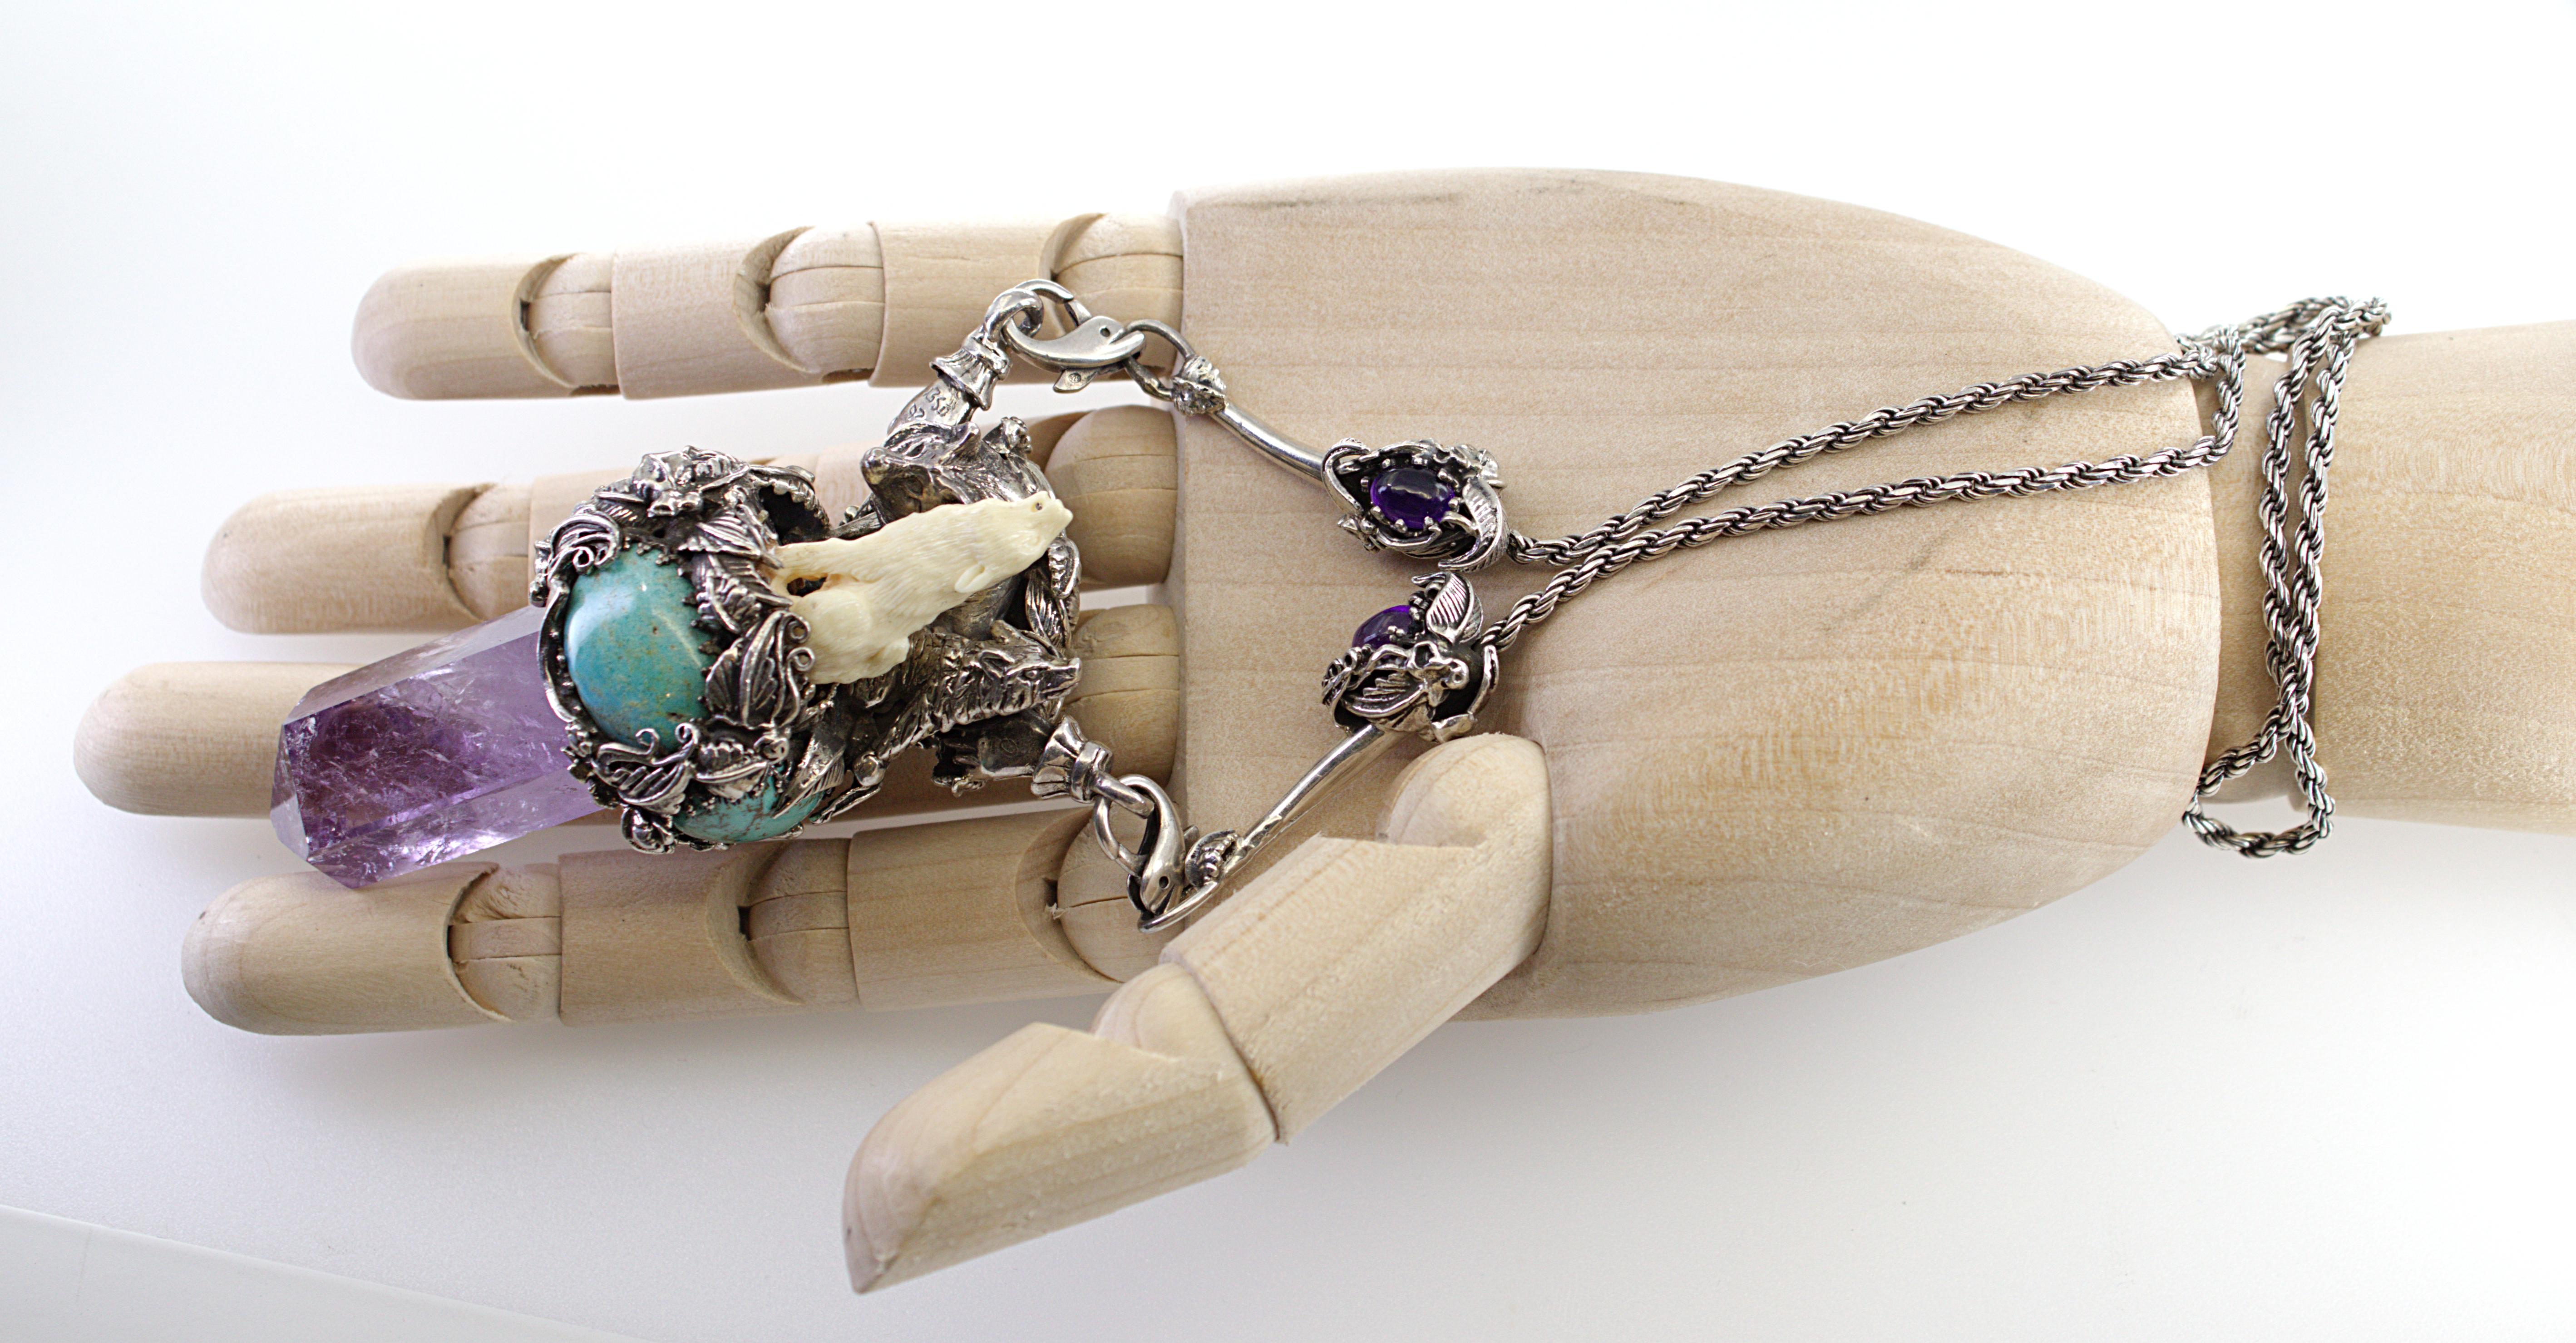 Featuring (1) natural amethyst crystal, 43.9 X 19.6 X 15.2 mm, accented by (5) oval turquoise cabochons, 19 X 16 mm to 14 X 10 mm, surmounted by a carved mammoth ivory wolf, set in a silver, double sided, 3-D mounting, depicting a mother wolf with 2